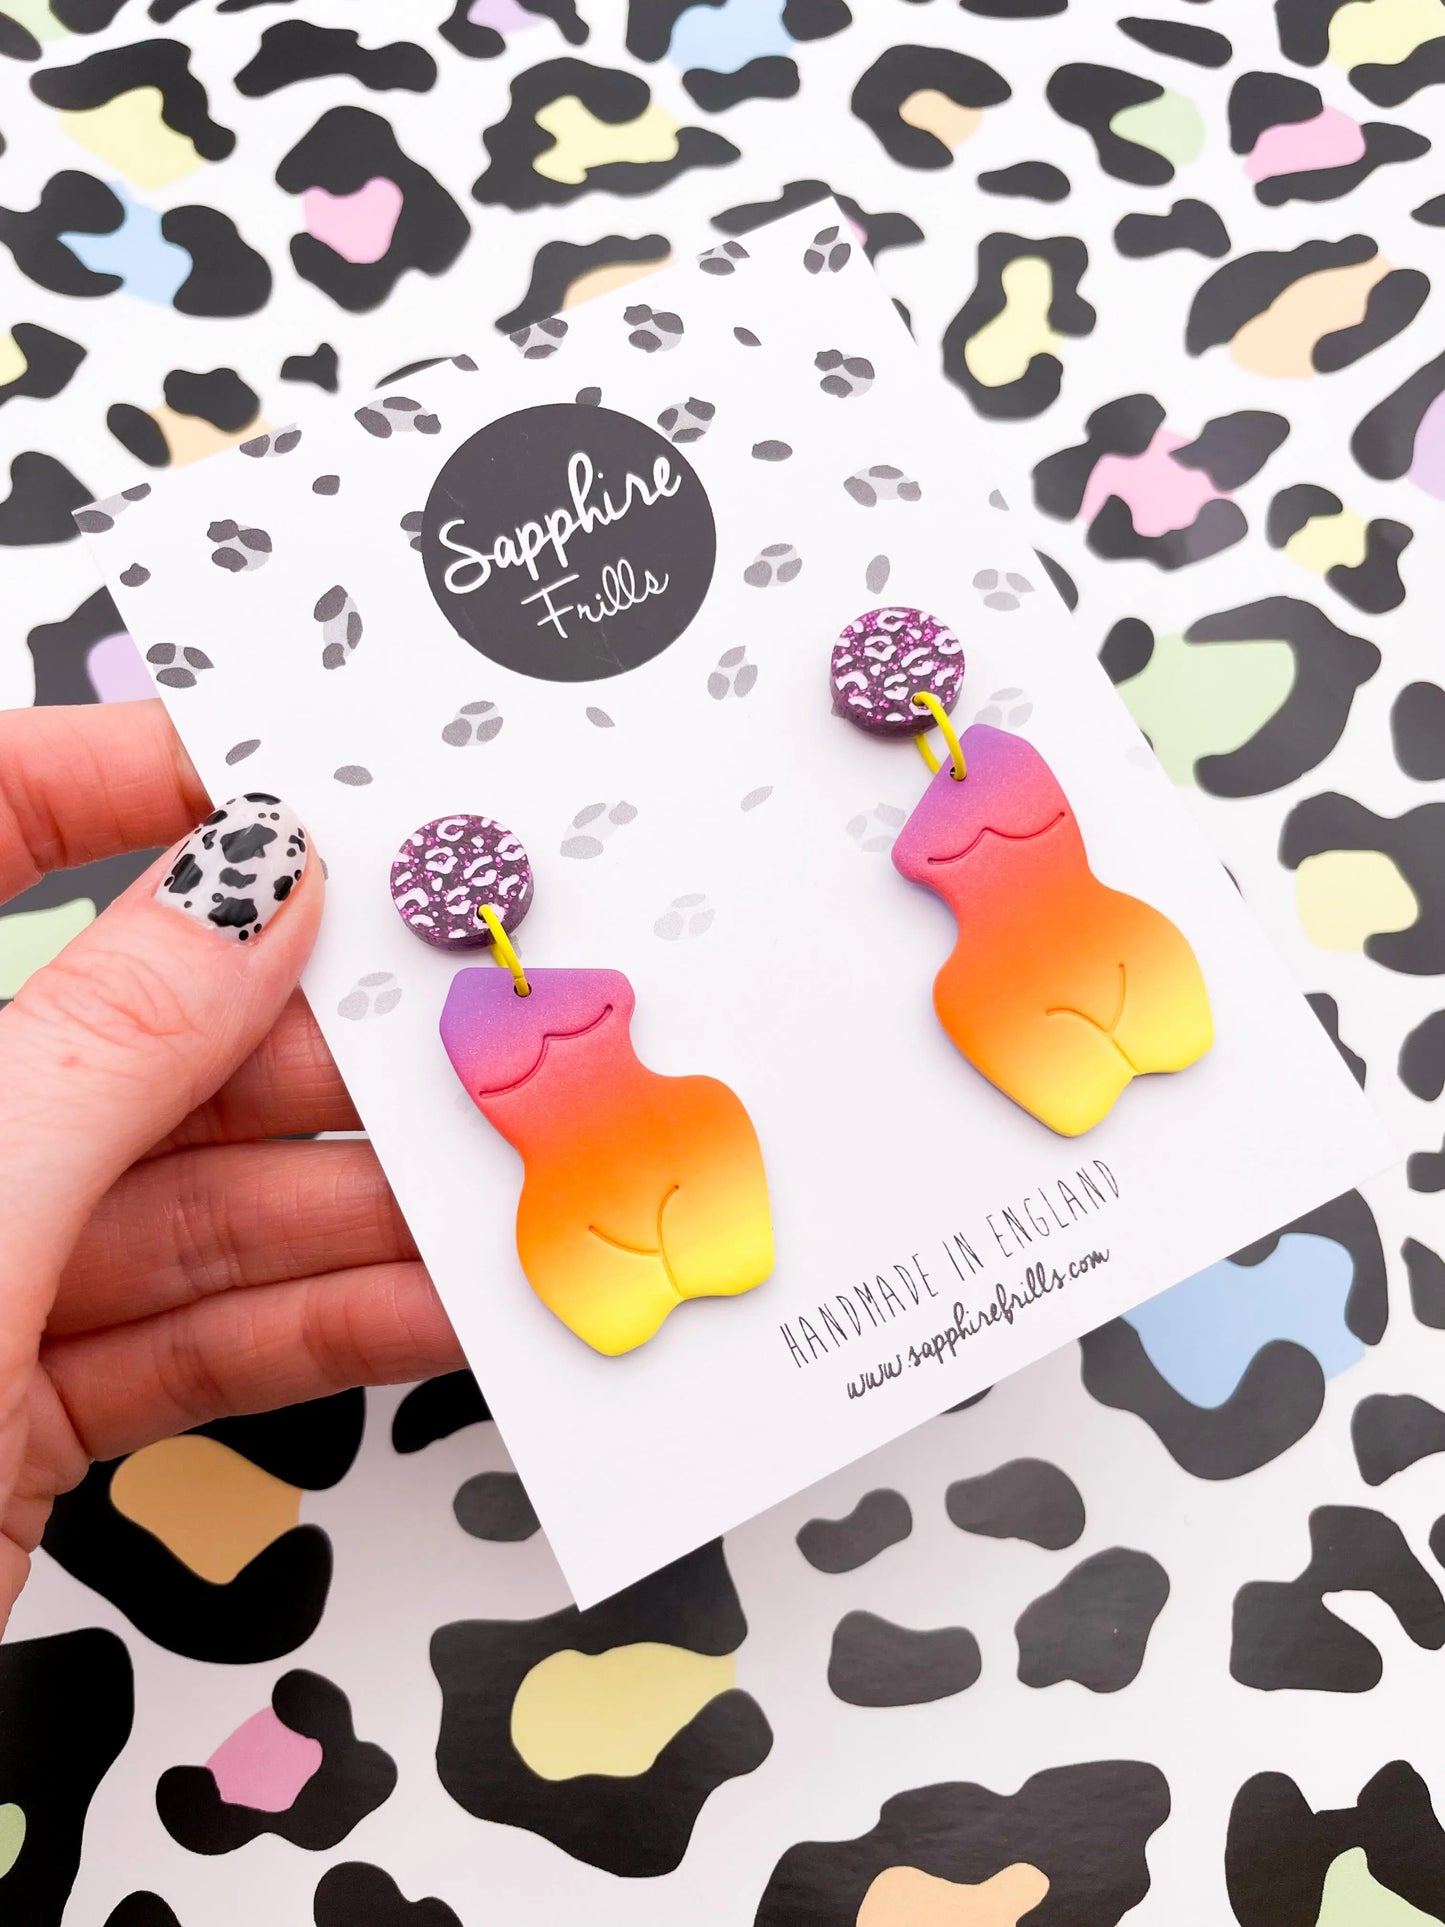 Sunset Ombre Leopard Print Curvy Body Dangle Earrings from Sapphire Frills